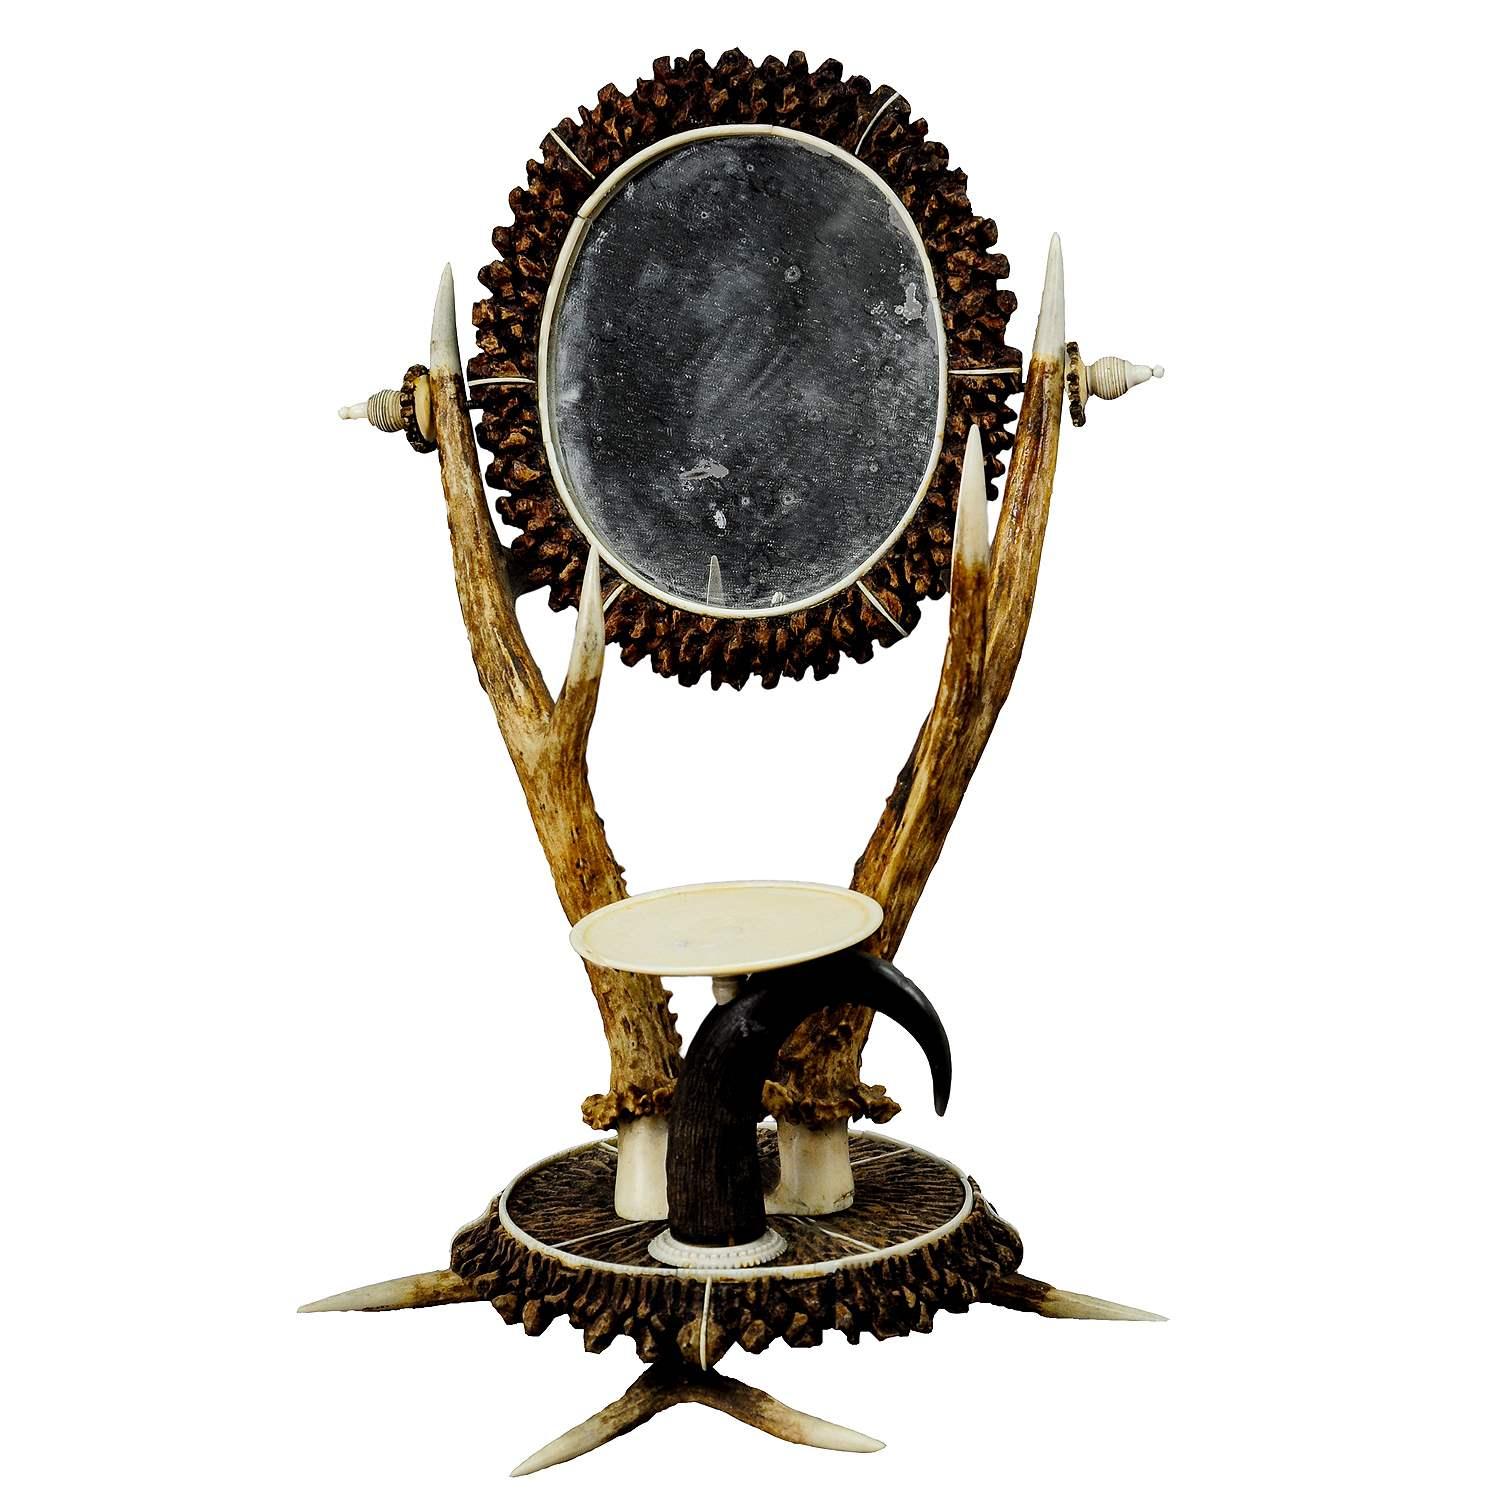 Antler Dressing Table Set with Mirror ca. 1840

A marvelous antler vanity with mirror and a ring tray. It was made of wood, veneered with horn pieces, deer antlers and a chamois horn. Executed ca. 1840. (veneer partly restored).

At the beginning of